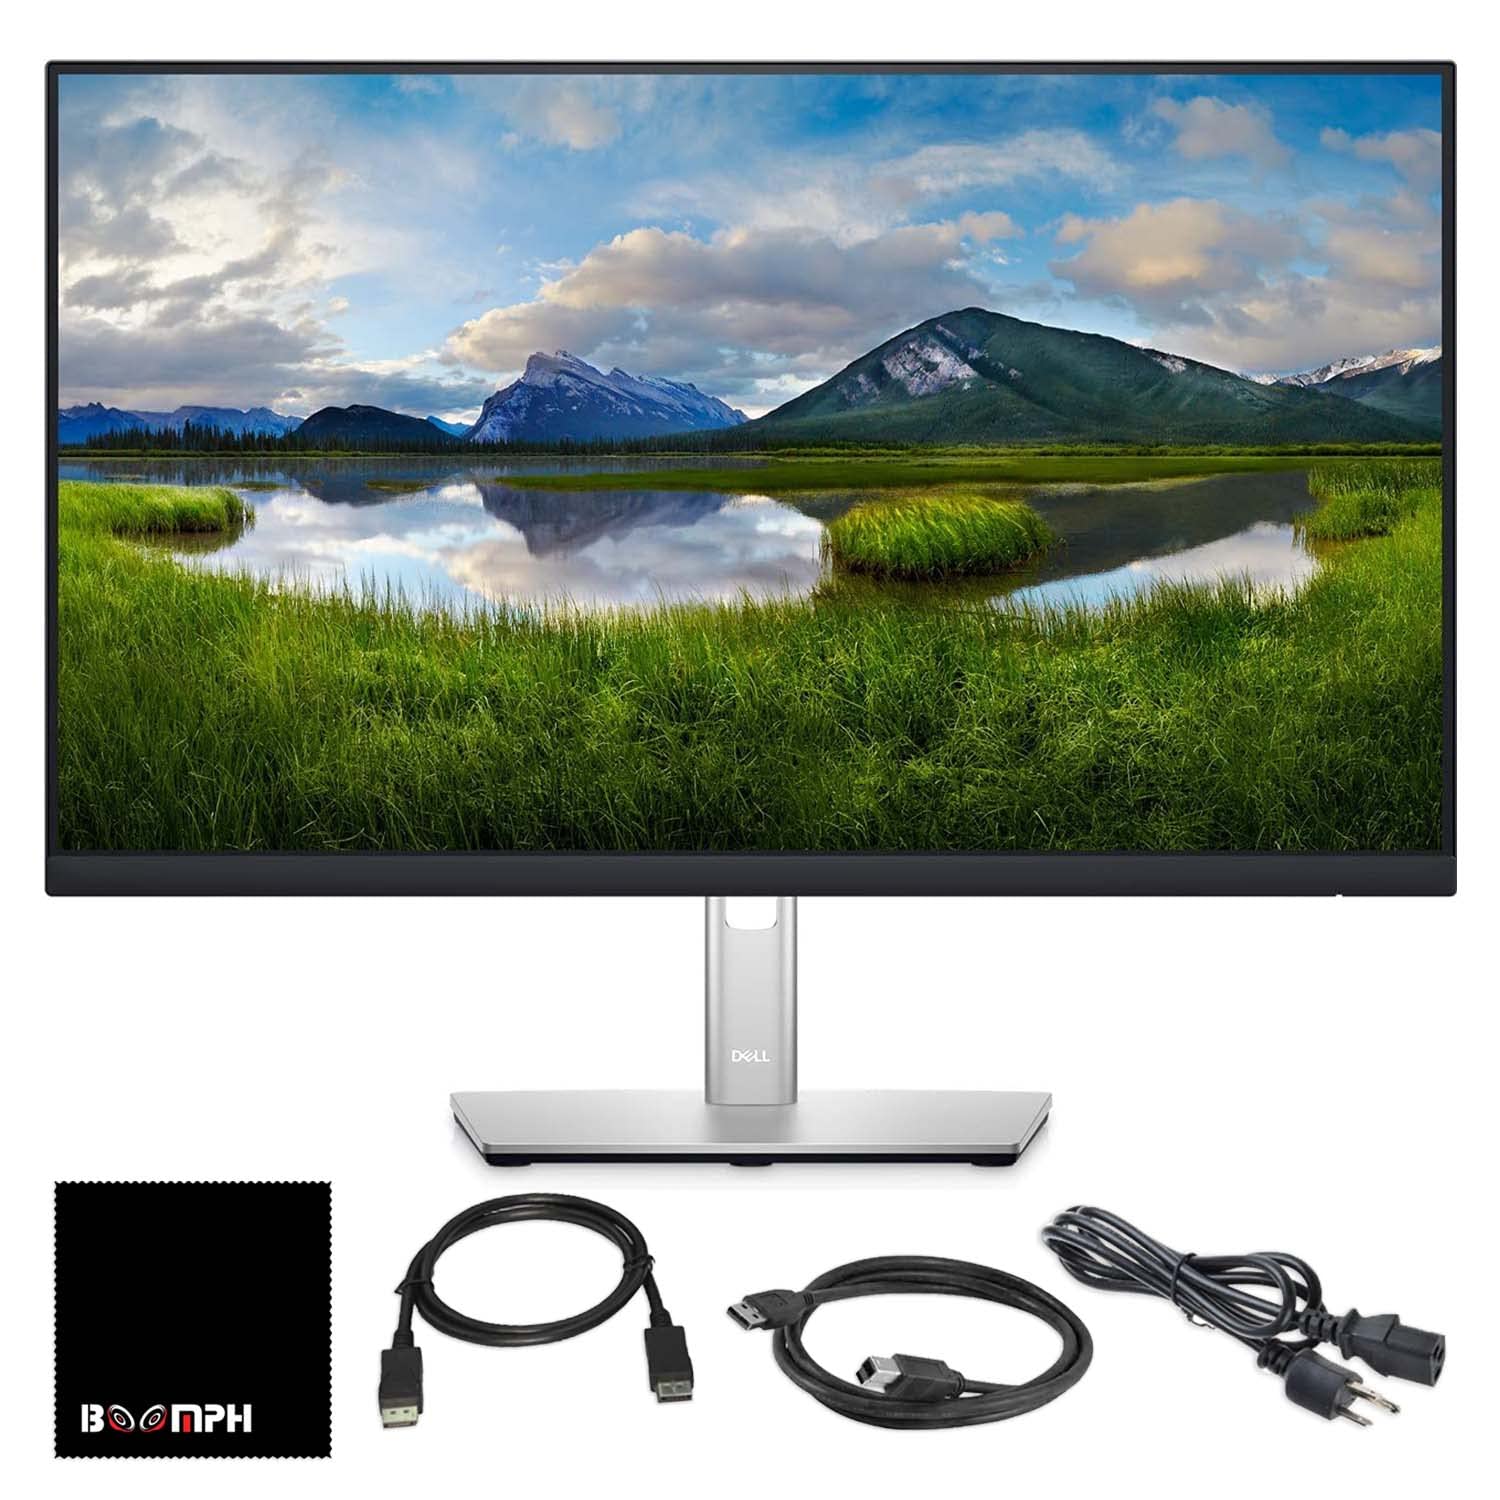 Dell P2222H 22 169 IPS Computer Monitor Screen with Display Port Cable and USB 3.0 Upstream Cable - New Model並行輸入